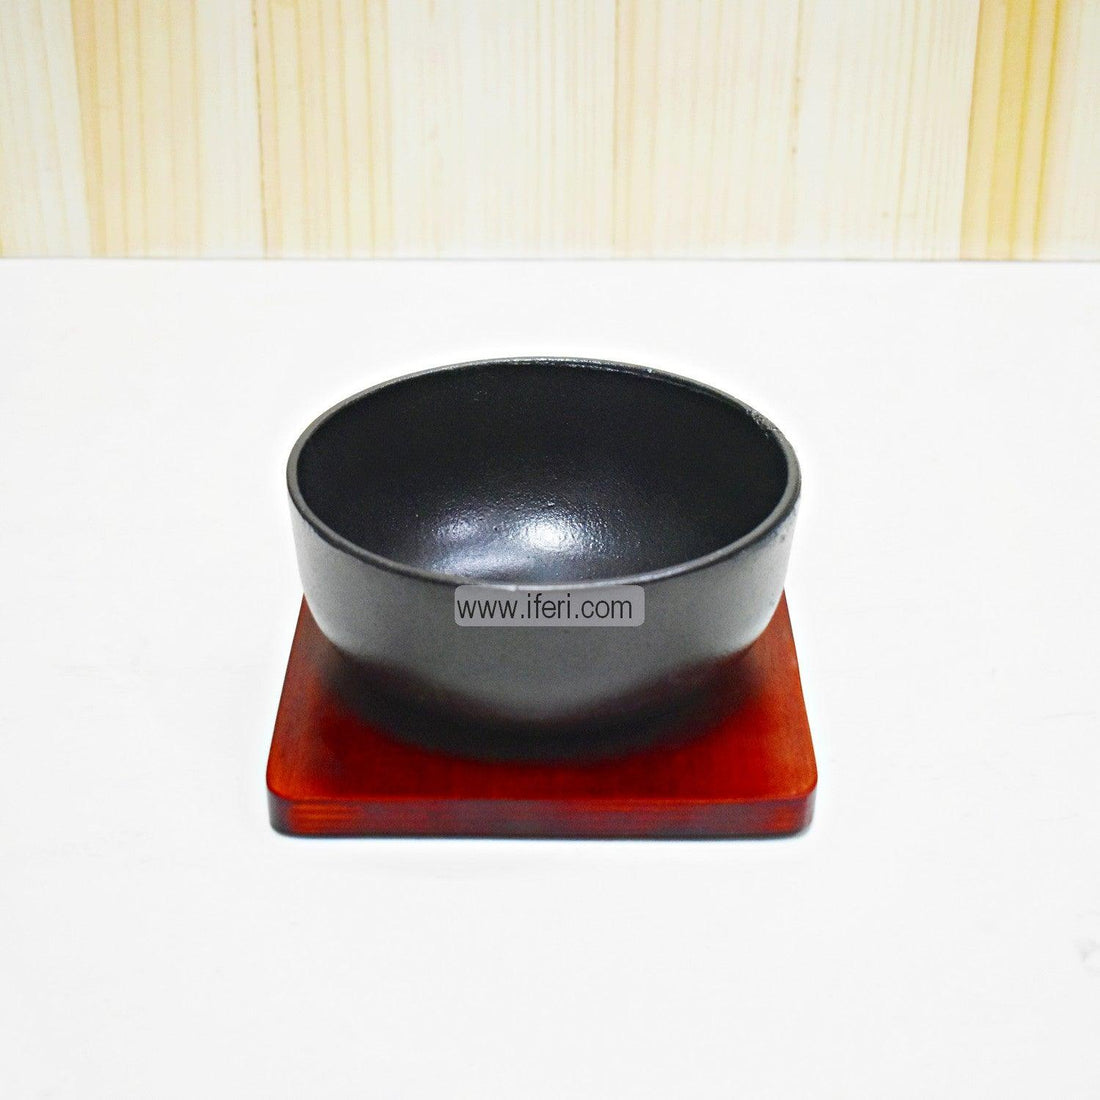 Thicken Stone Bowl Korean Stone Bowl for Induction Cooker with Wooden Tray RY0519 Price in Bangladesh - iferi.com